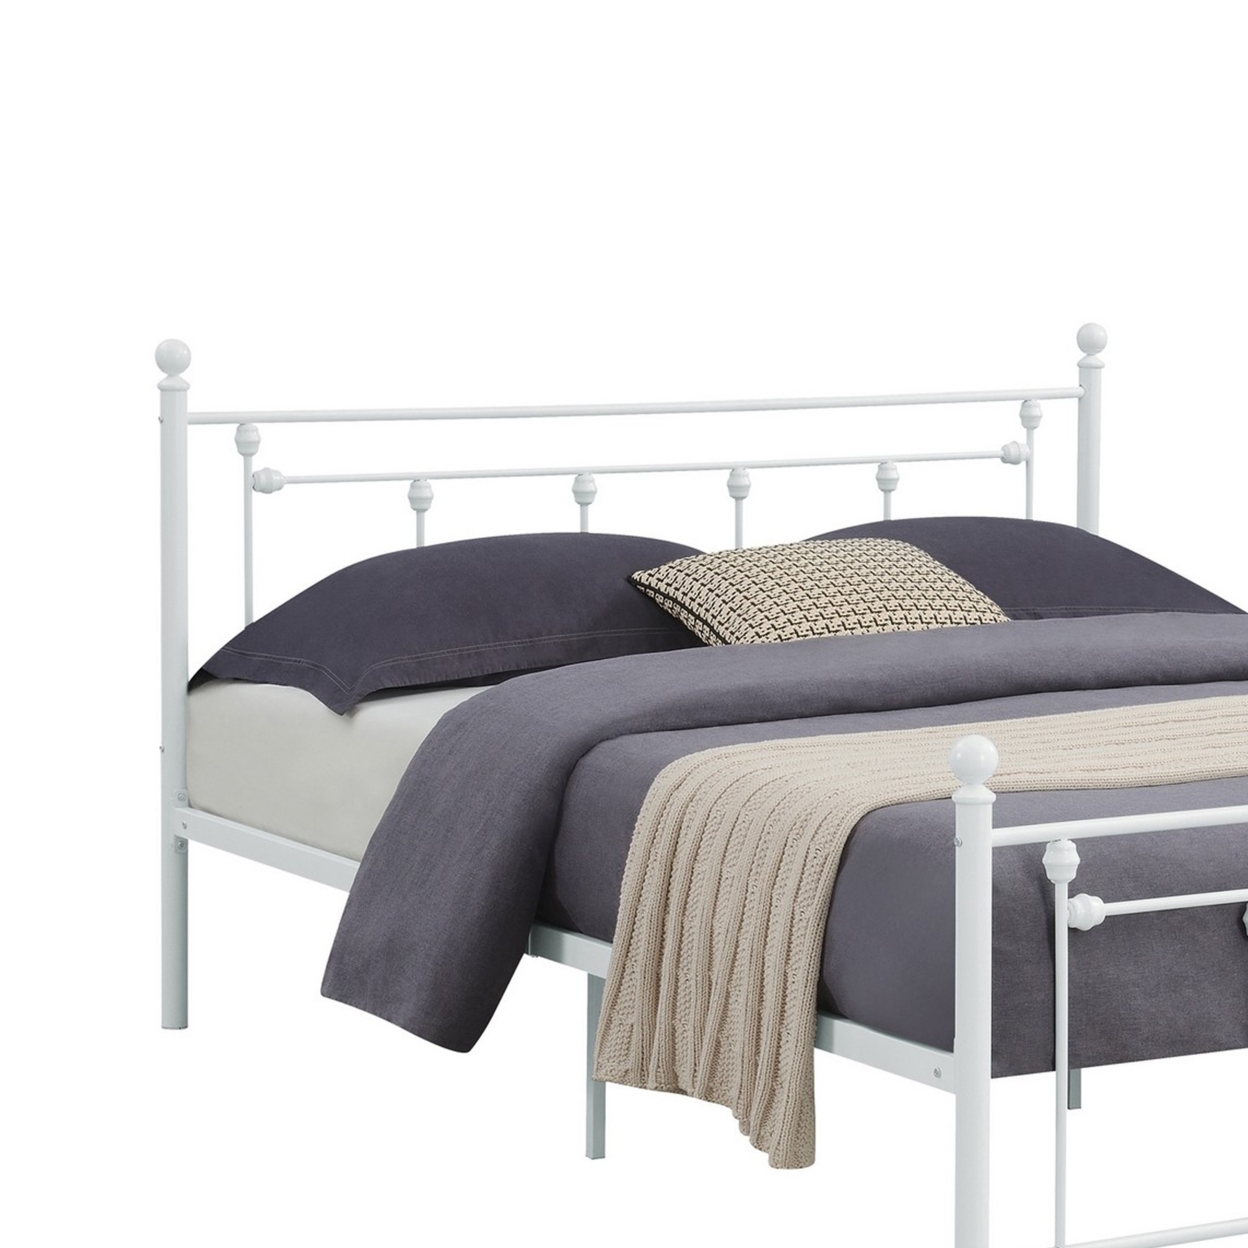 Olly Modern Queen Size Bed Heavy Steel Metal Slatted Frame, Matte White